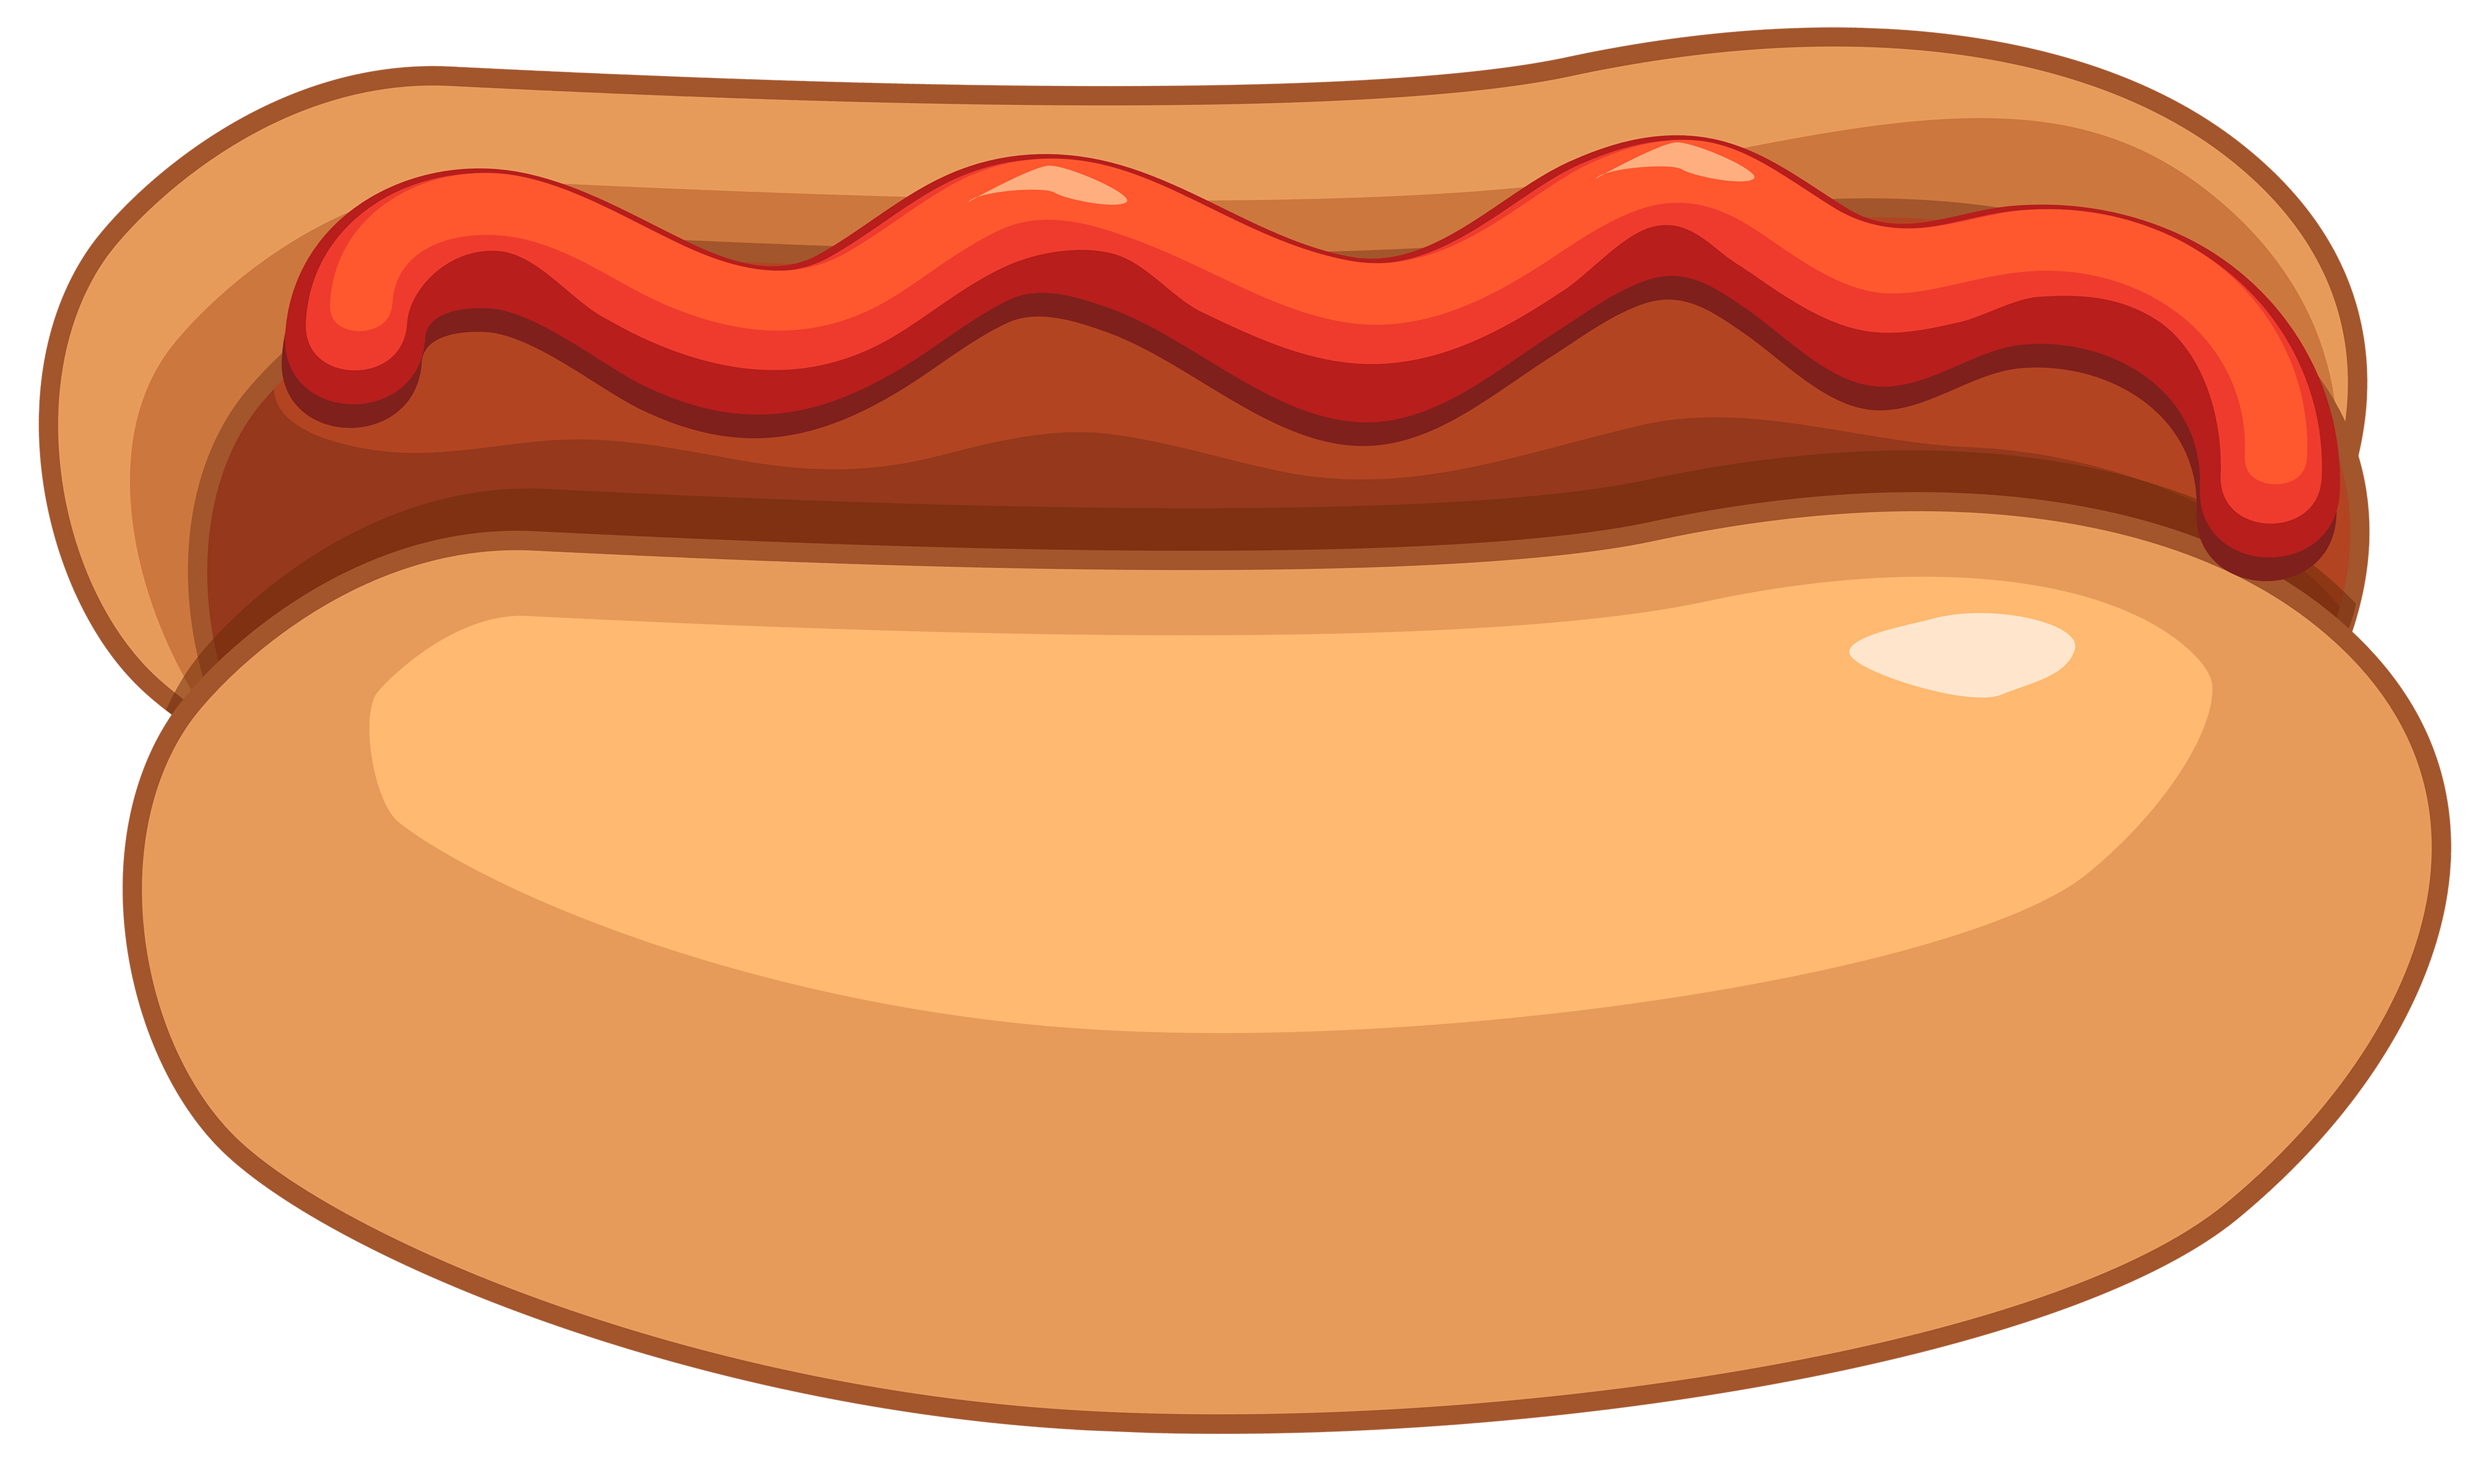 free clipart images of hot dogs - photo #25